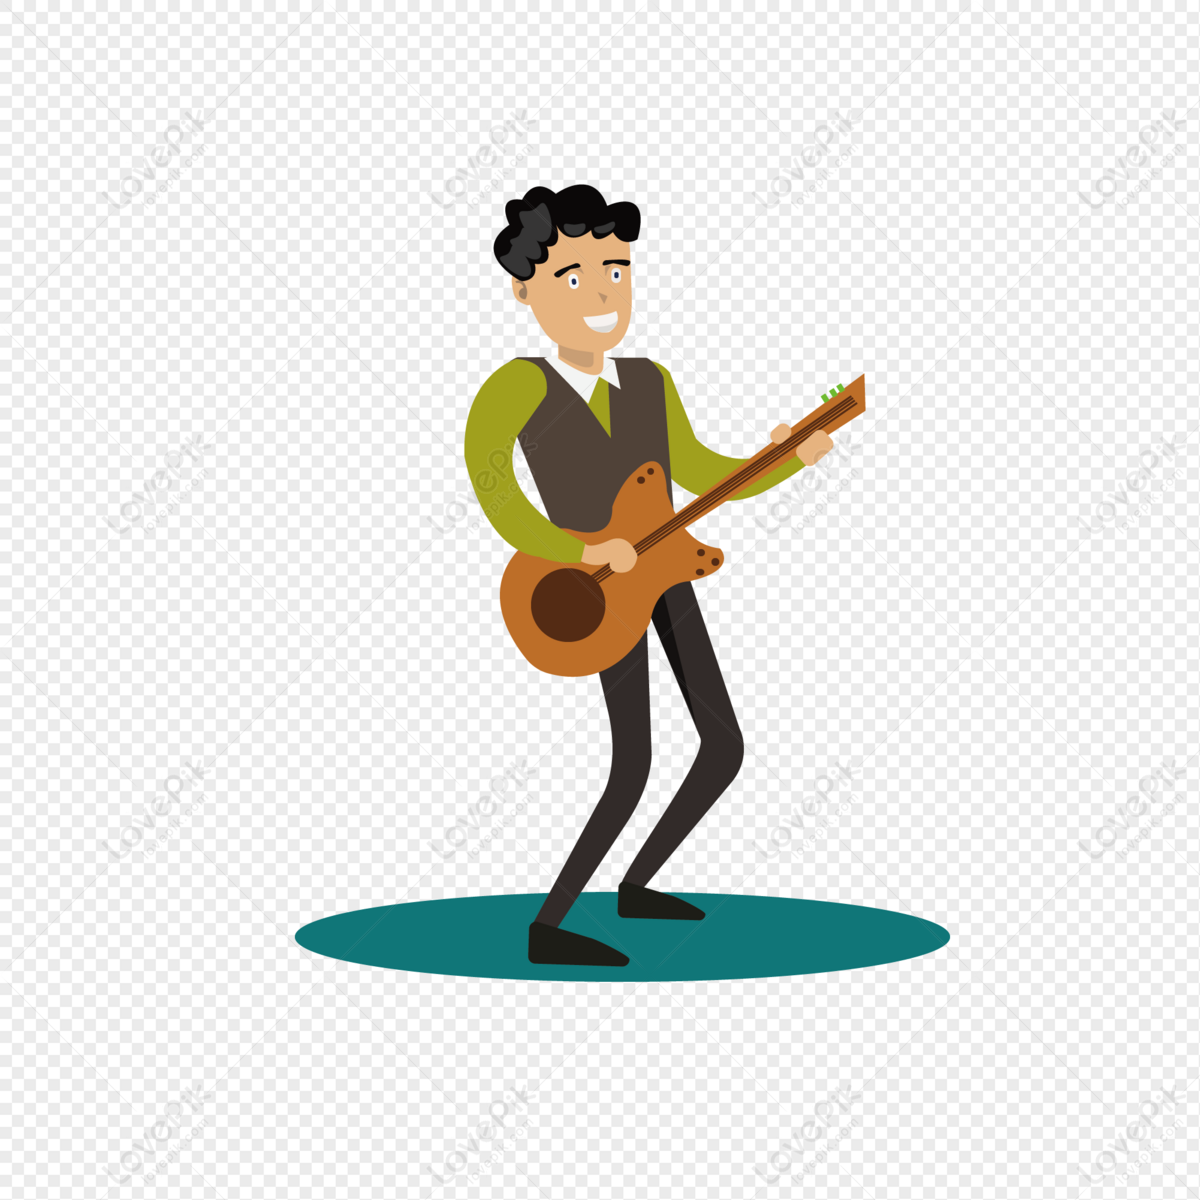 Playing Musical Instrument Characters PNG Transparent Image And Clipart  Image For Free Download - Lovepik | 401373317